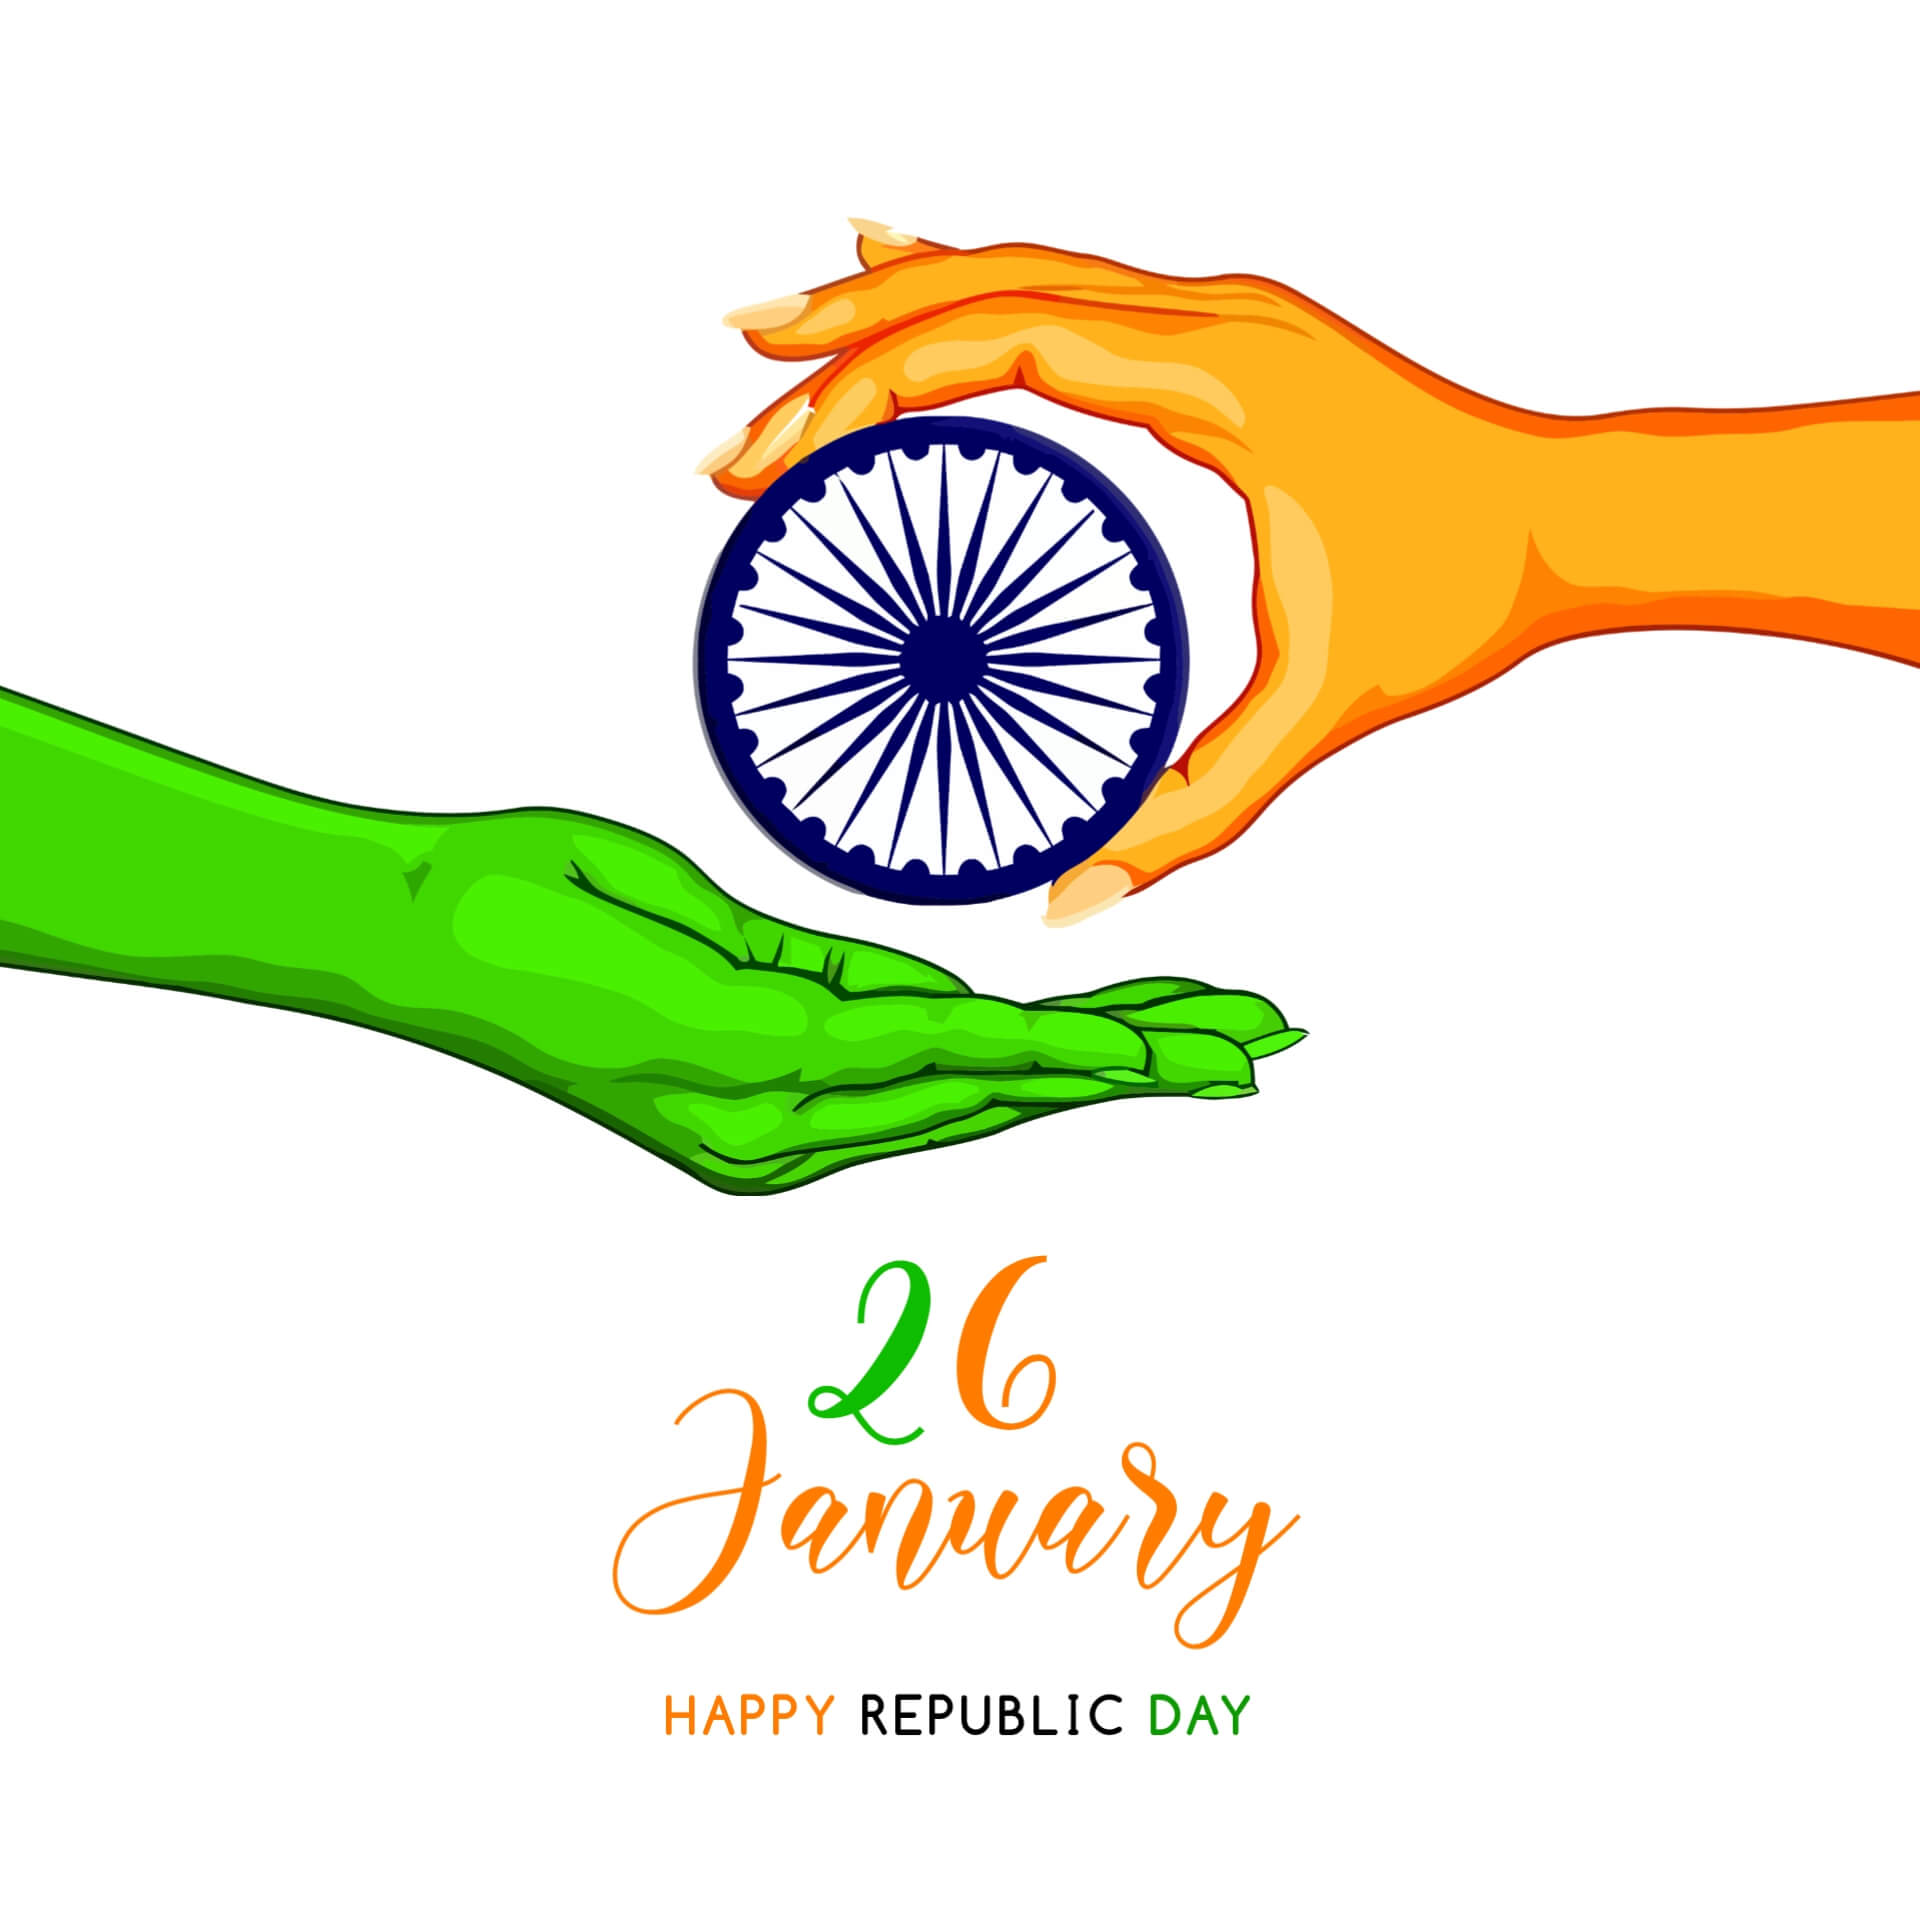 Creative Republic Day Images